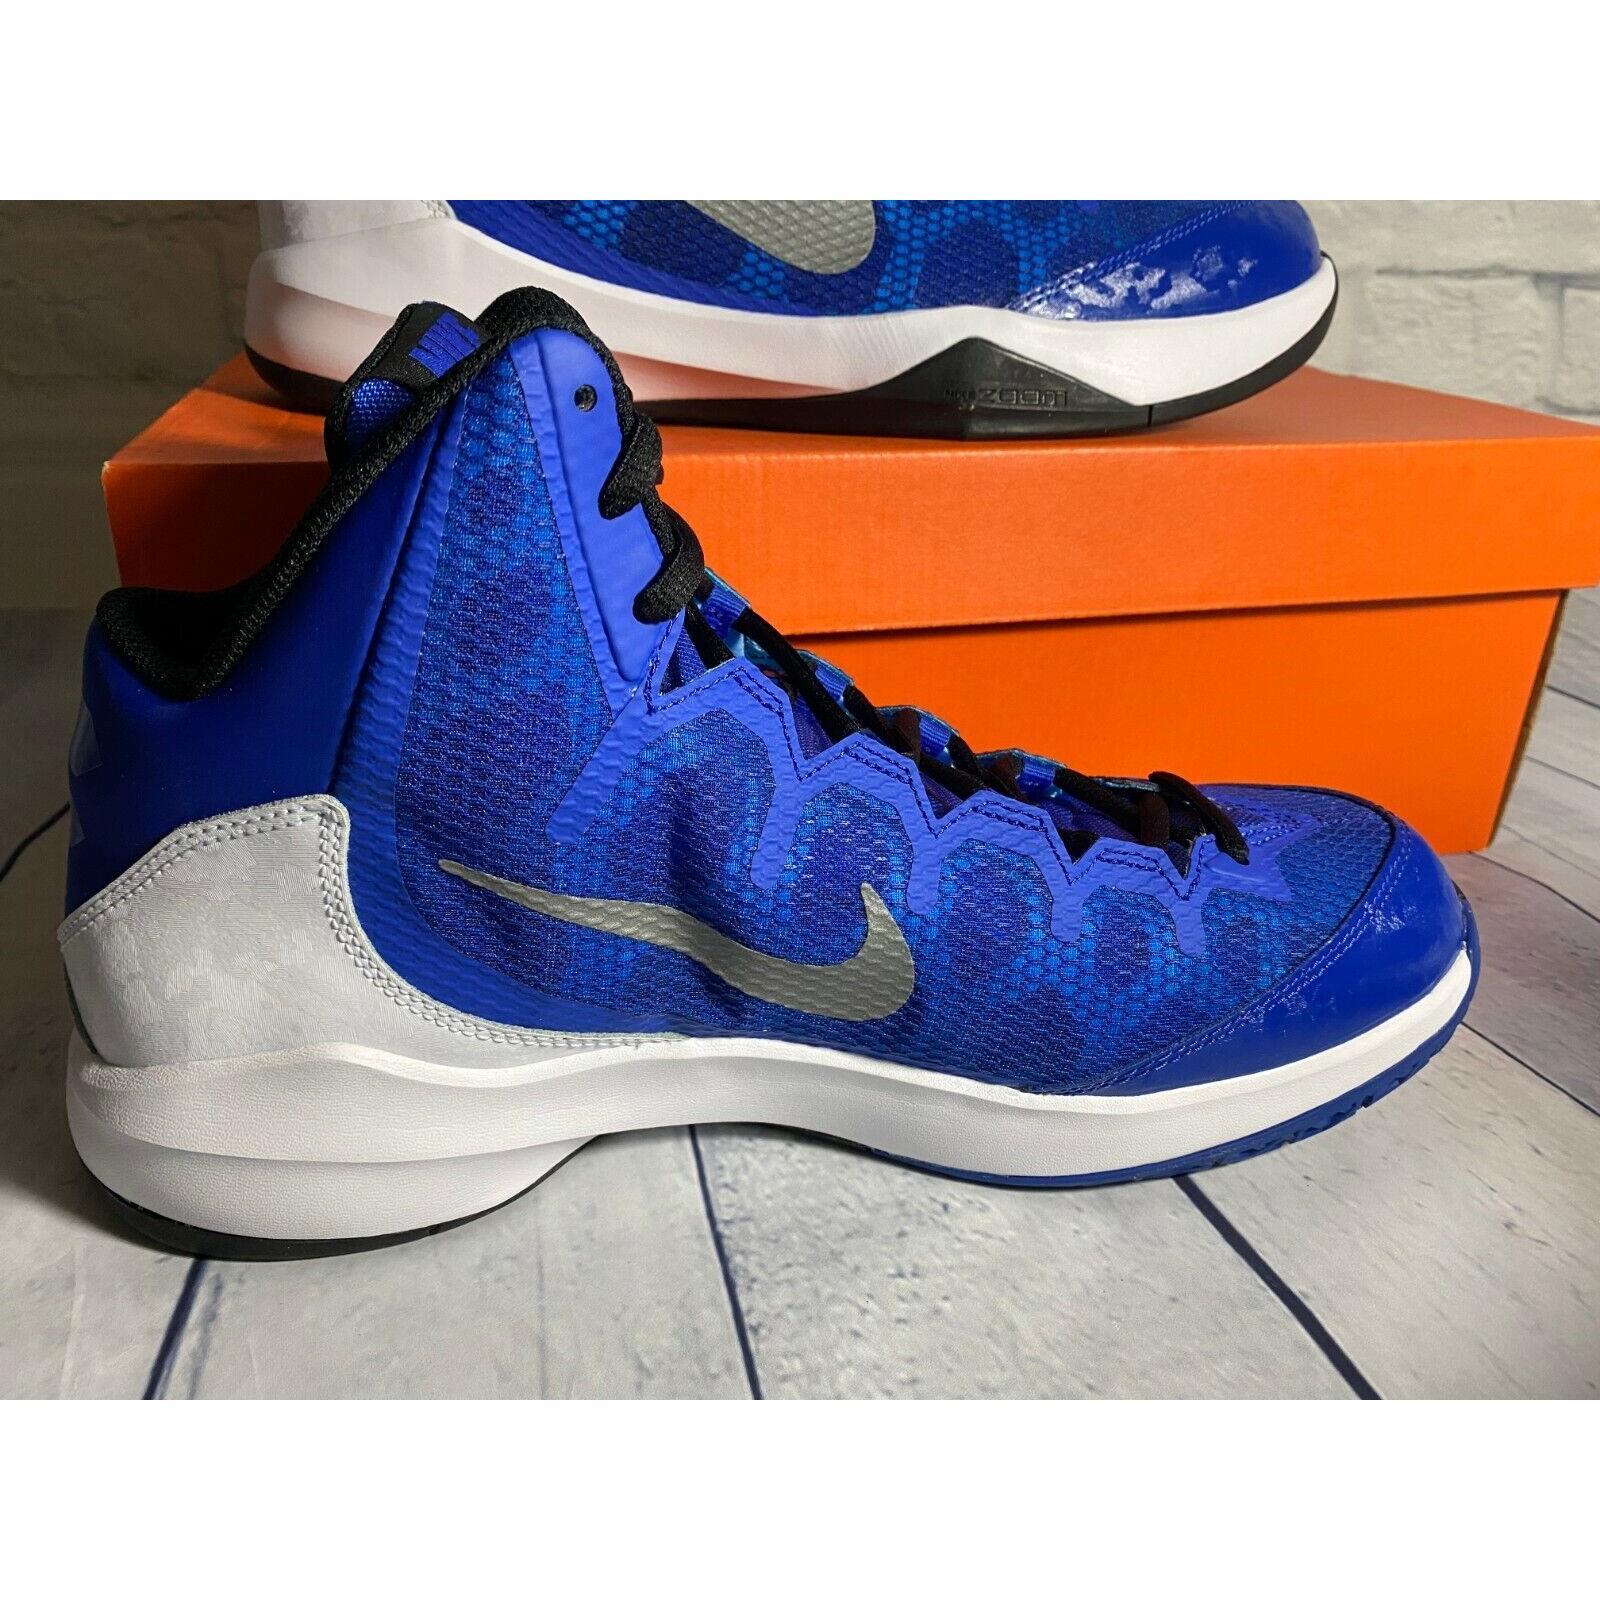 Nike shoes ZOOM WITHOUT DOUBT - BLUE 3